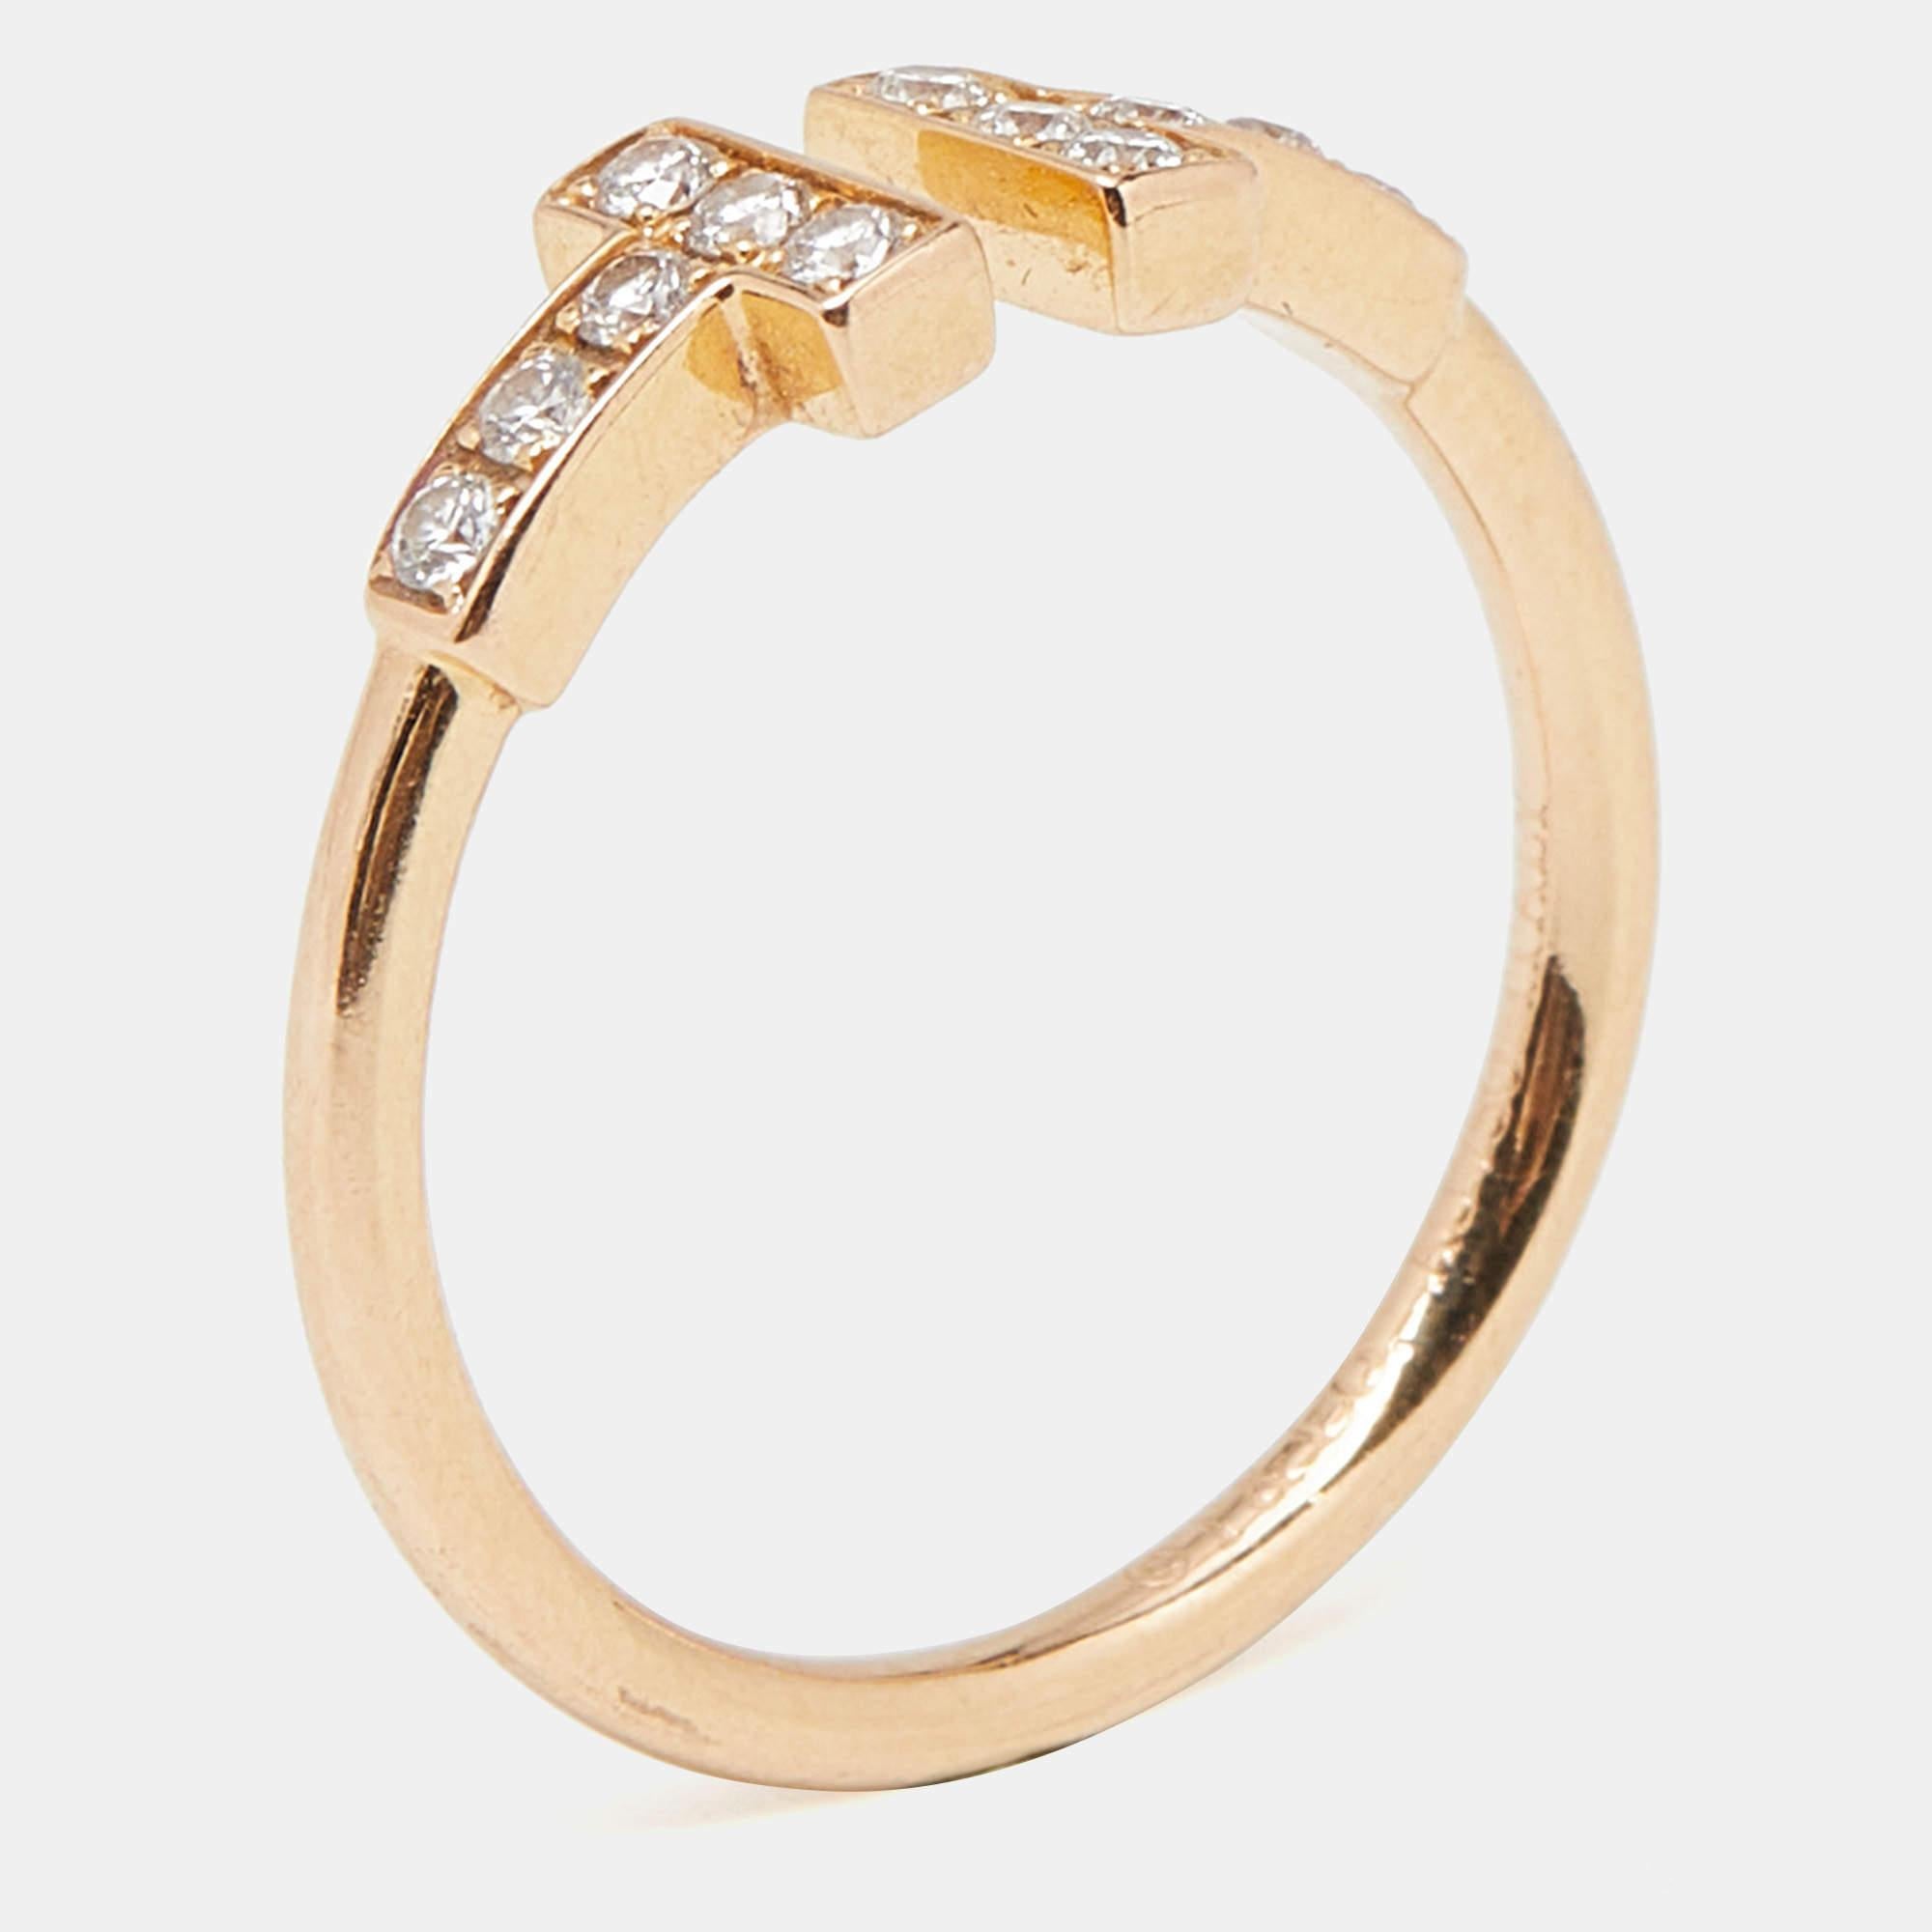 Tiffany & Co. Twire Diamonds 18k Yellow Gold Ring Size 50 For Sale 2